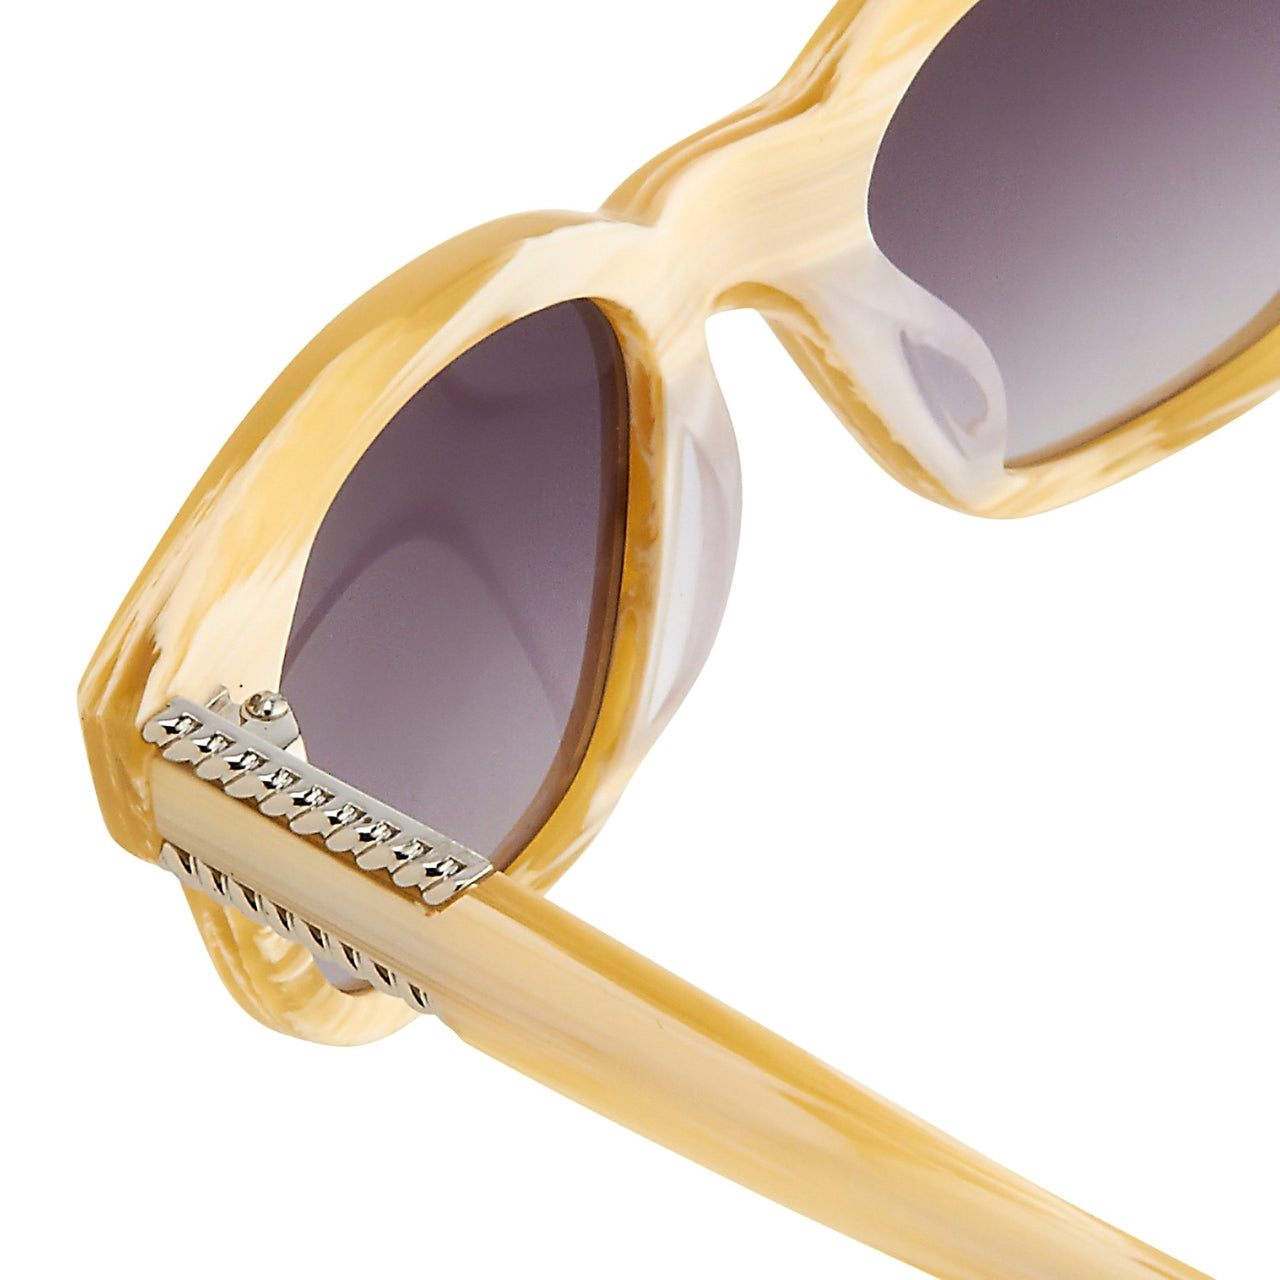 Agent Provocateur Sunglasses Square Striped Yellow and Grey Lenses Category 3 - AP24C6SUN - Watches & Crystals